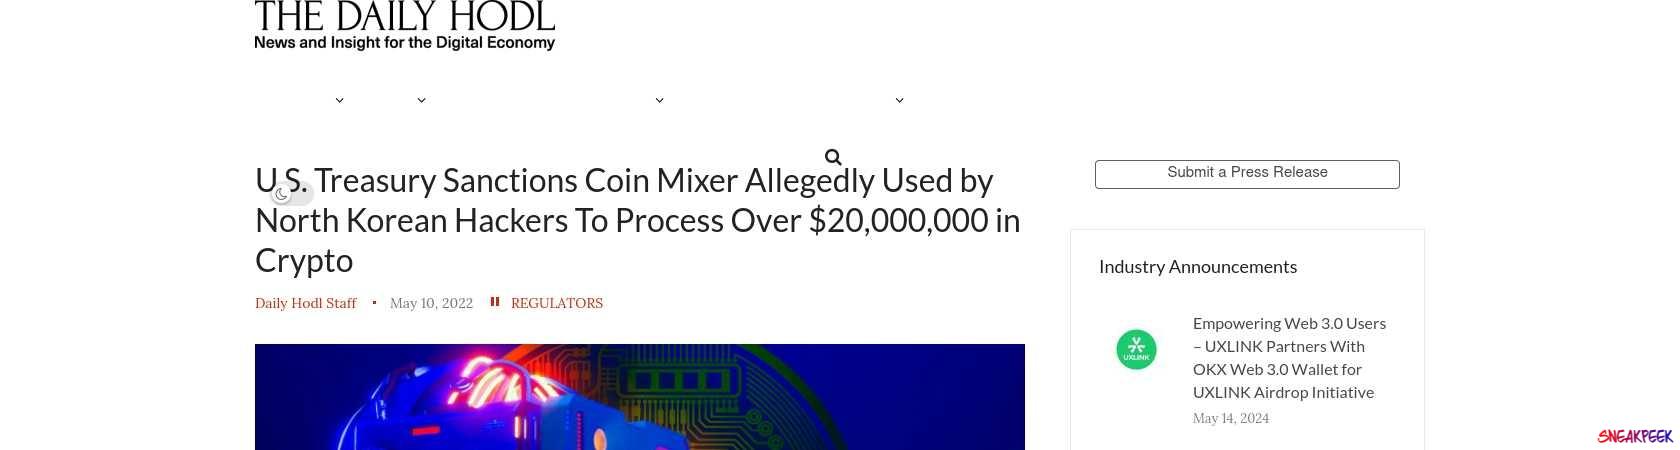 Read the full Article:  ⭲ U.S. Treasury Sanctions Coin Mixer Allegedly Used by North Korean Hackers To Process Over $20,000,000 in Crypto